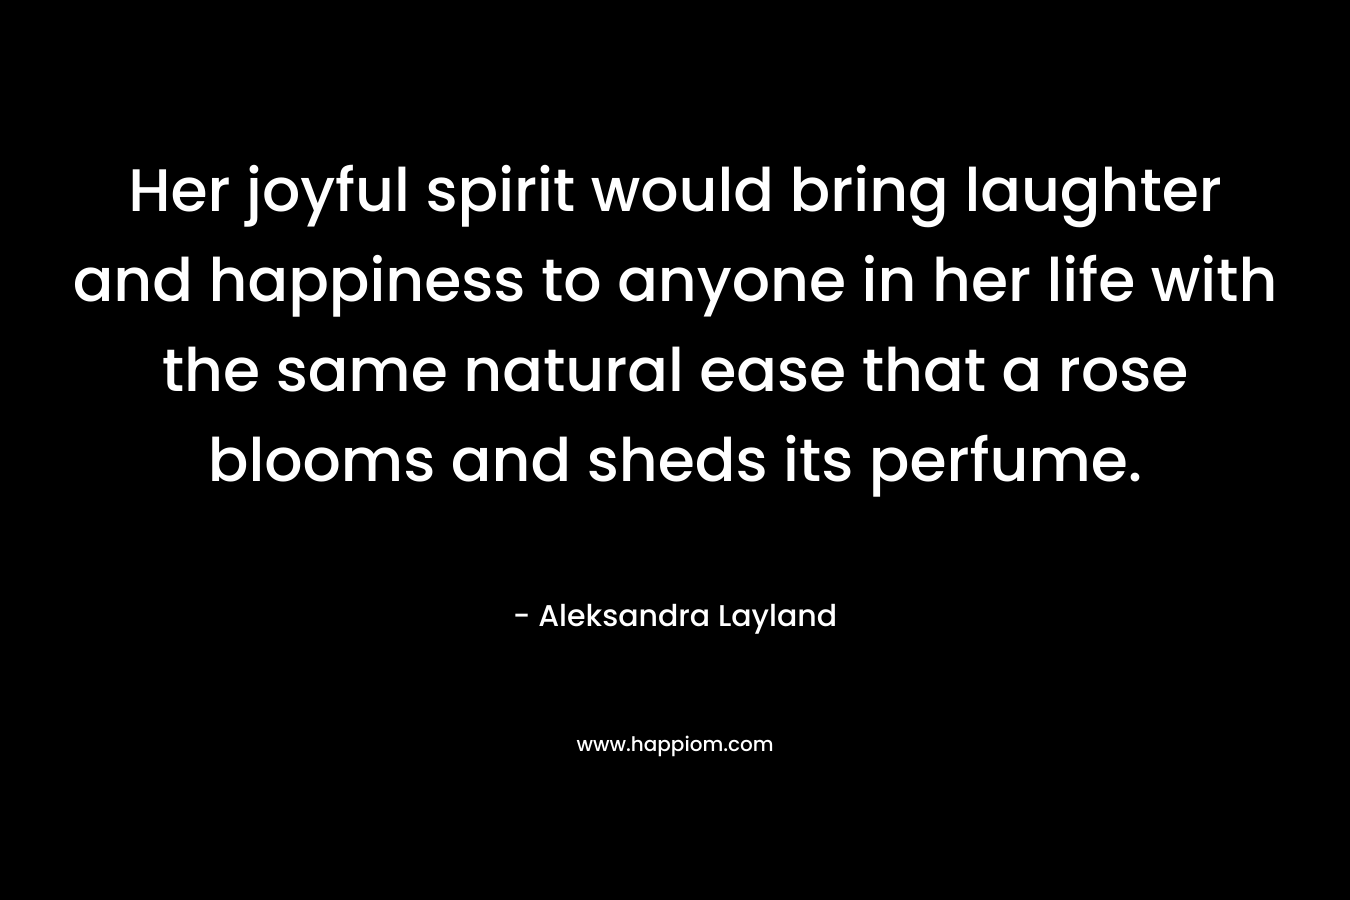 Her joyful spirit would bring laughter and happiness to anyone in her life with the same natural ease that a rose blooms and sheds its perfume. – Aleksandra Layland